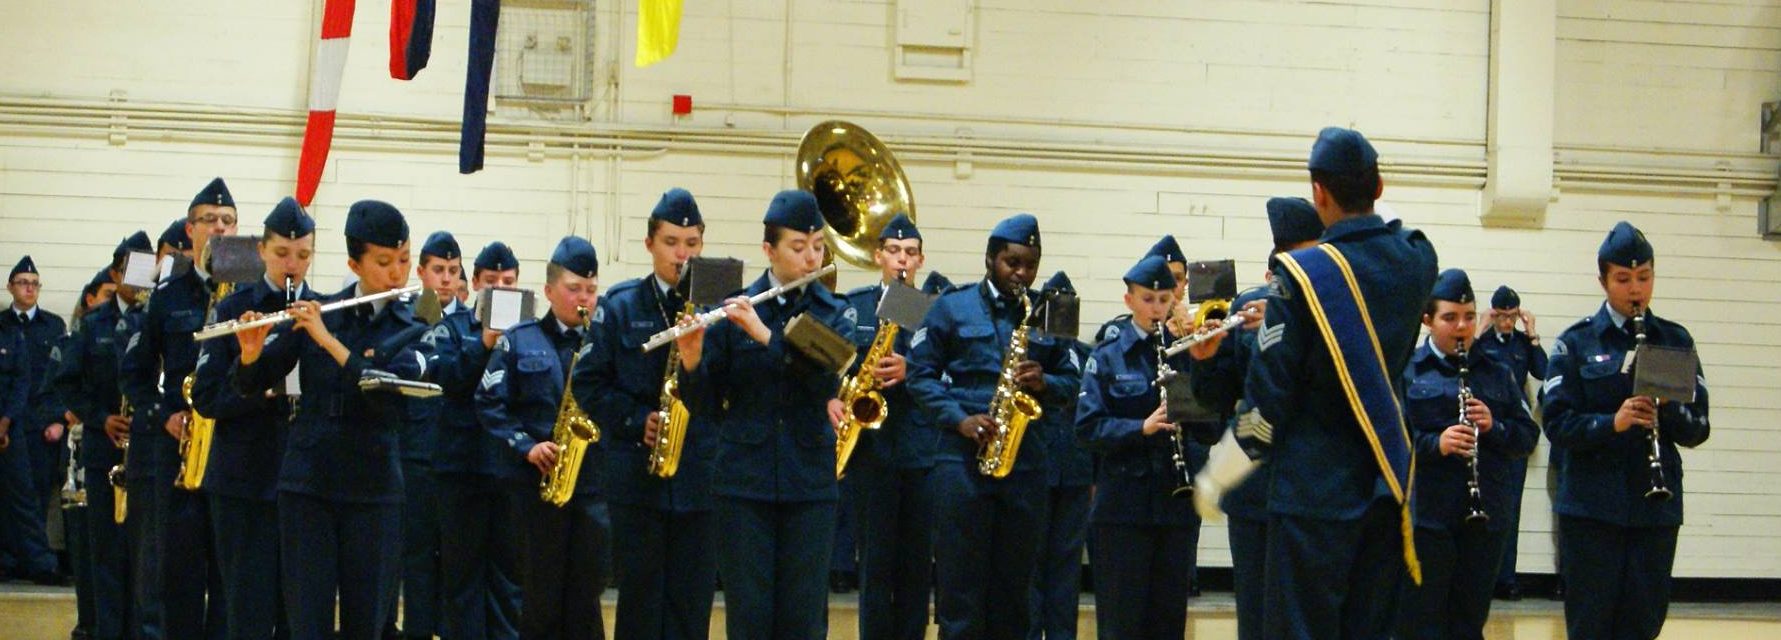  Air Cadets in Edmonton, Alberta   Join Now  